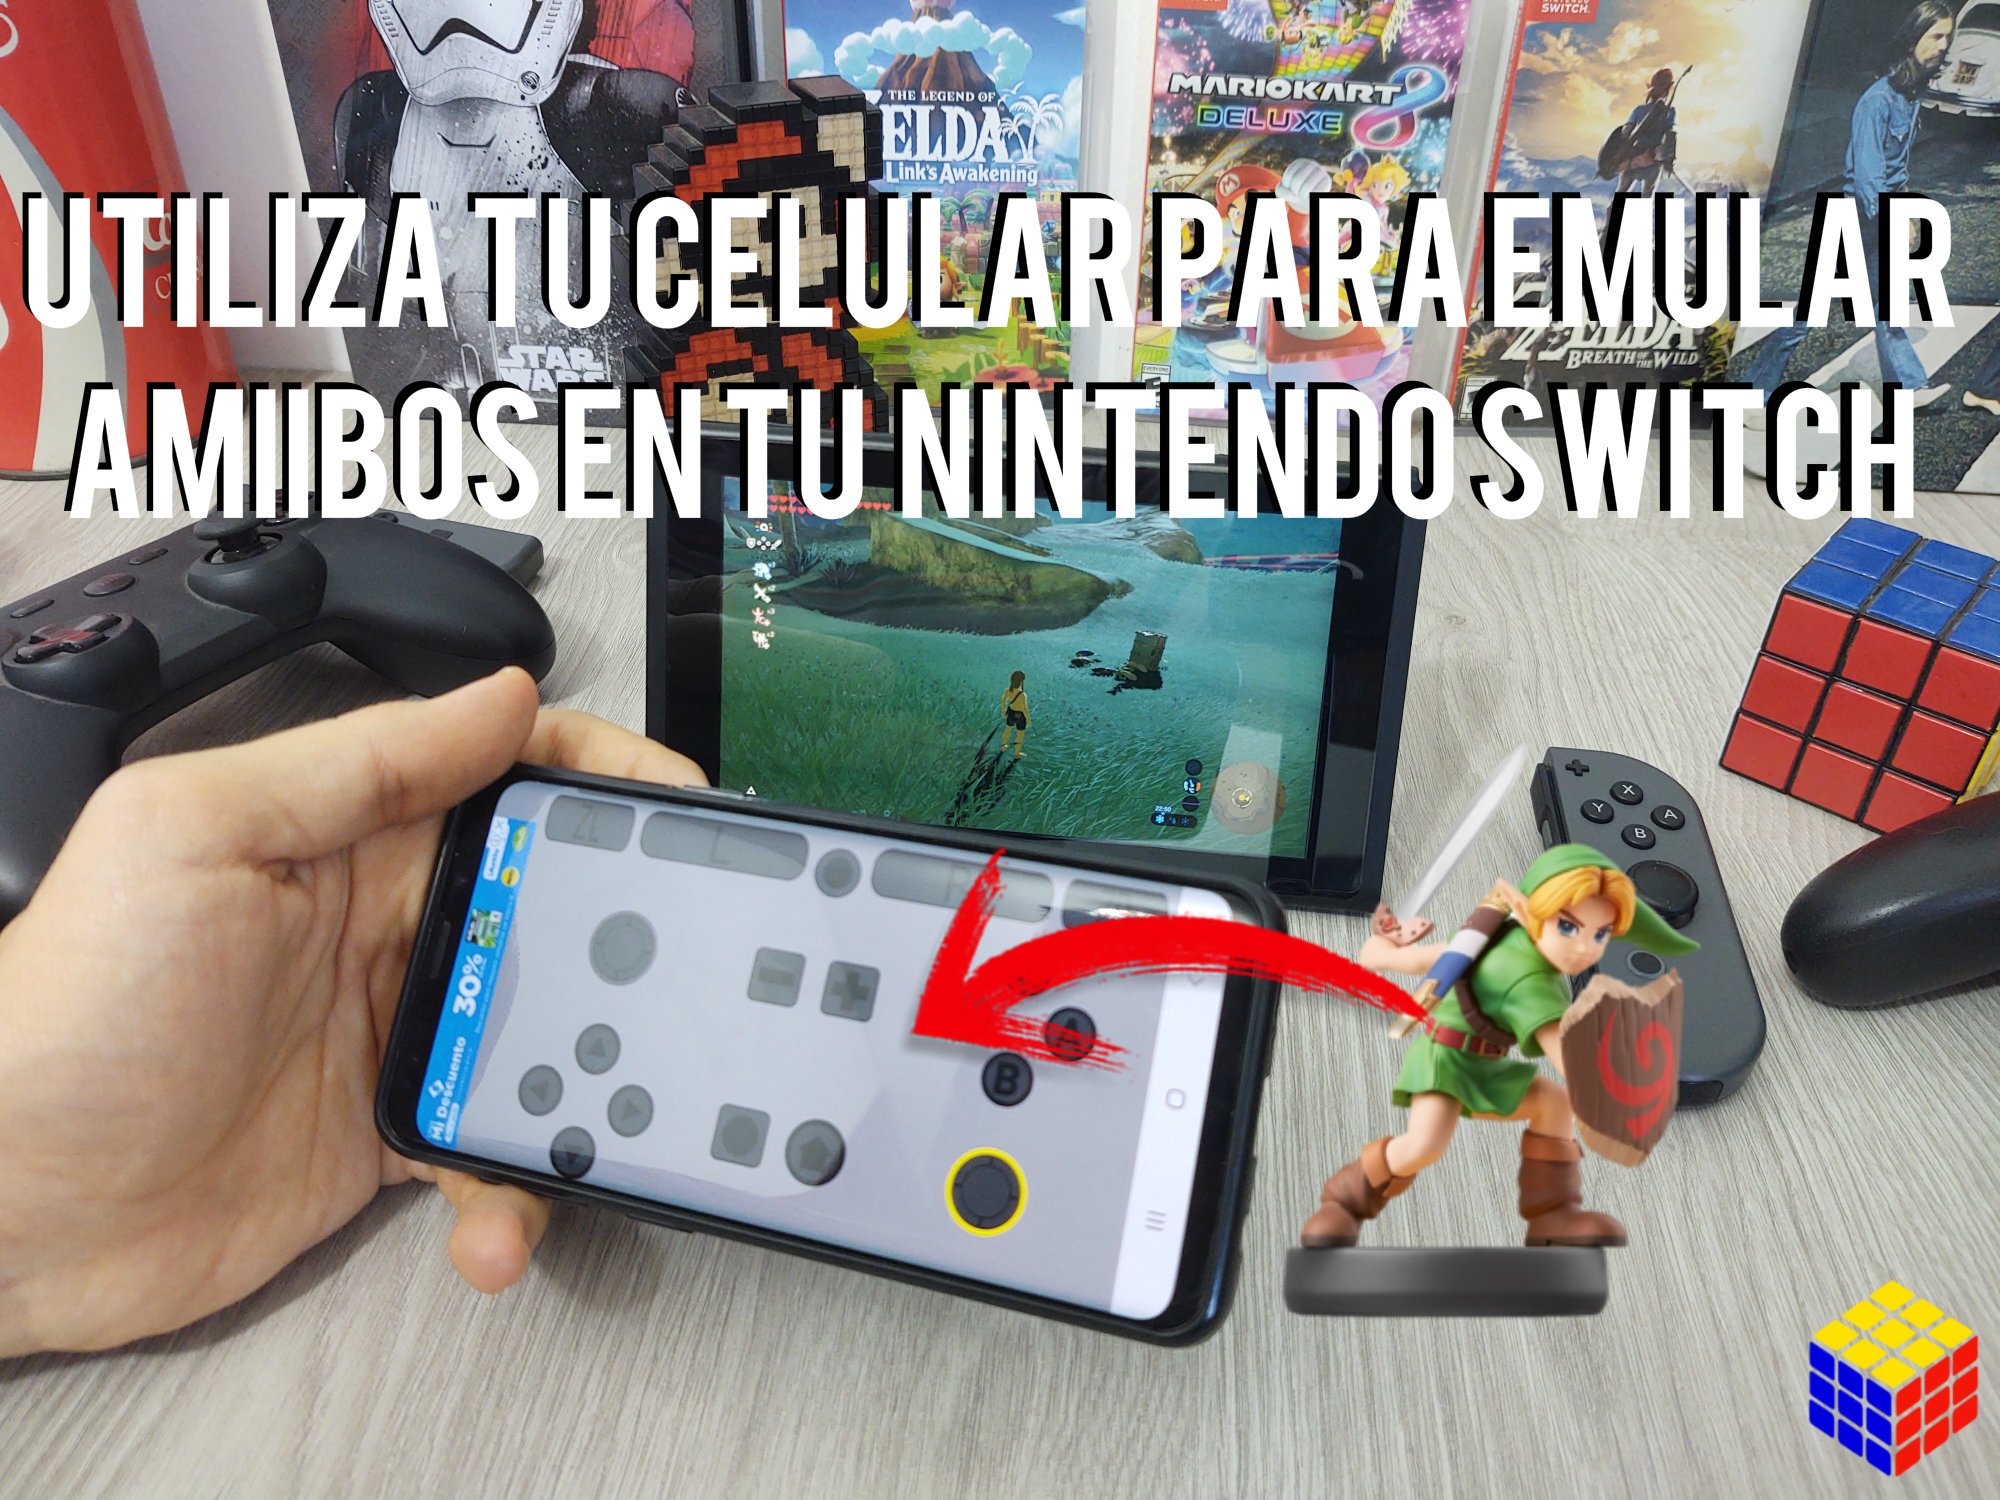 Use your cell phone to emulate Amiibos on your Nintendo Switch for free